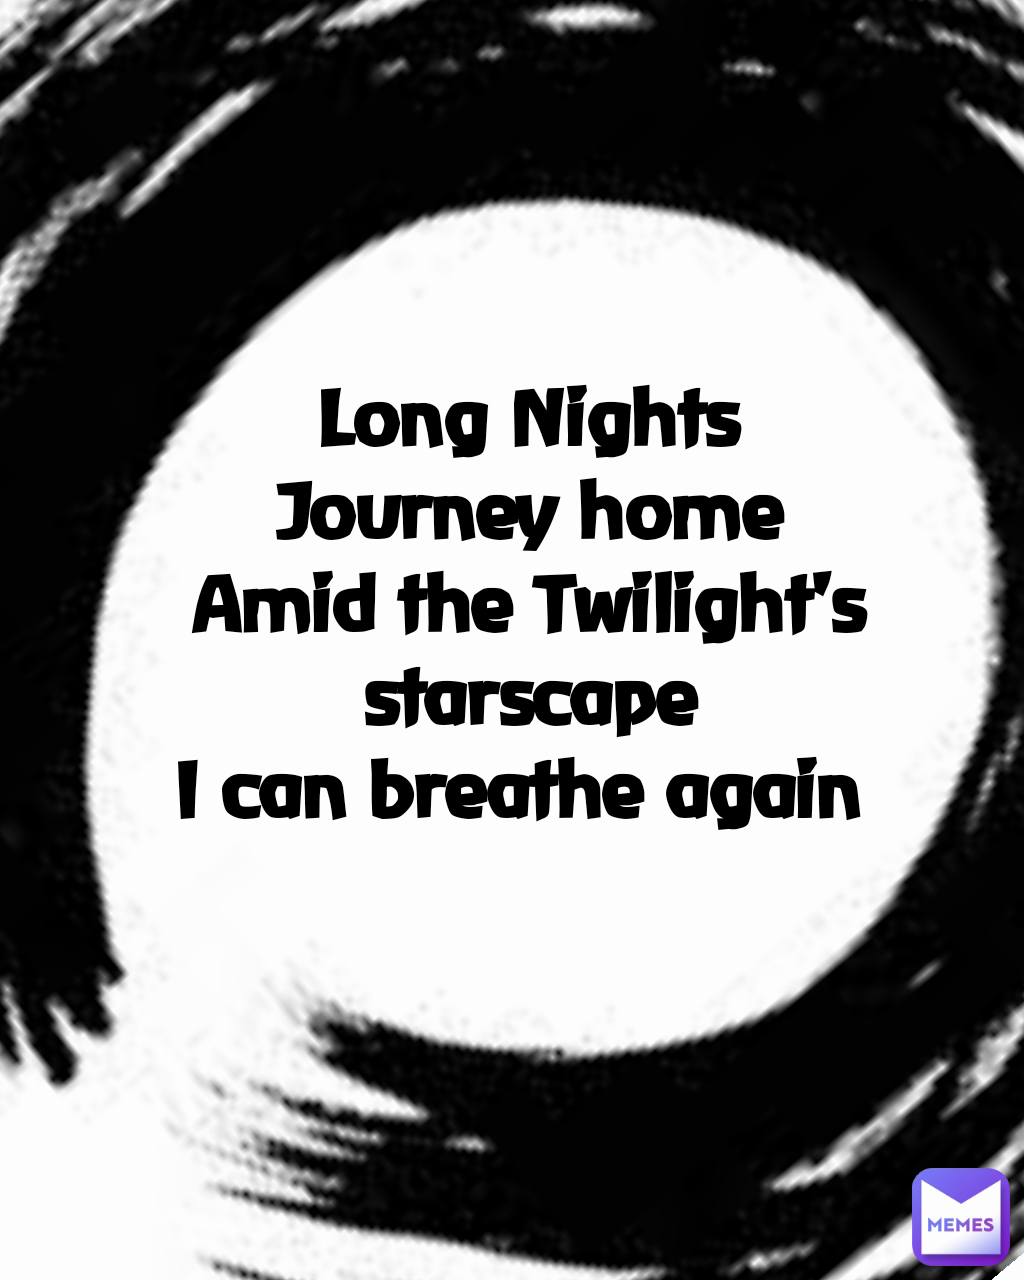 Long Nights Journey home
Amid the Twilight's starscape
I can breathe again 